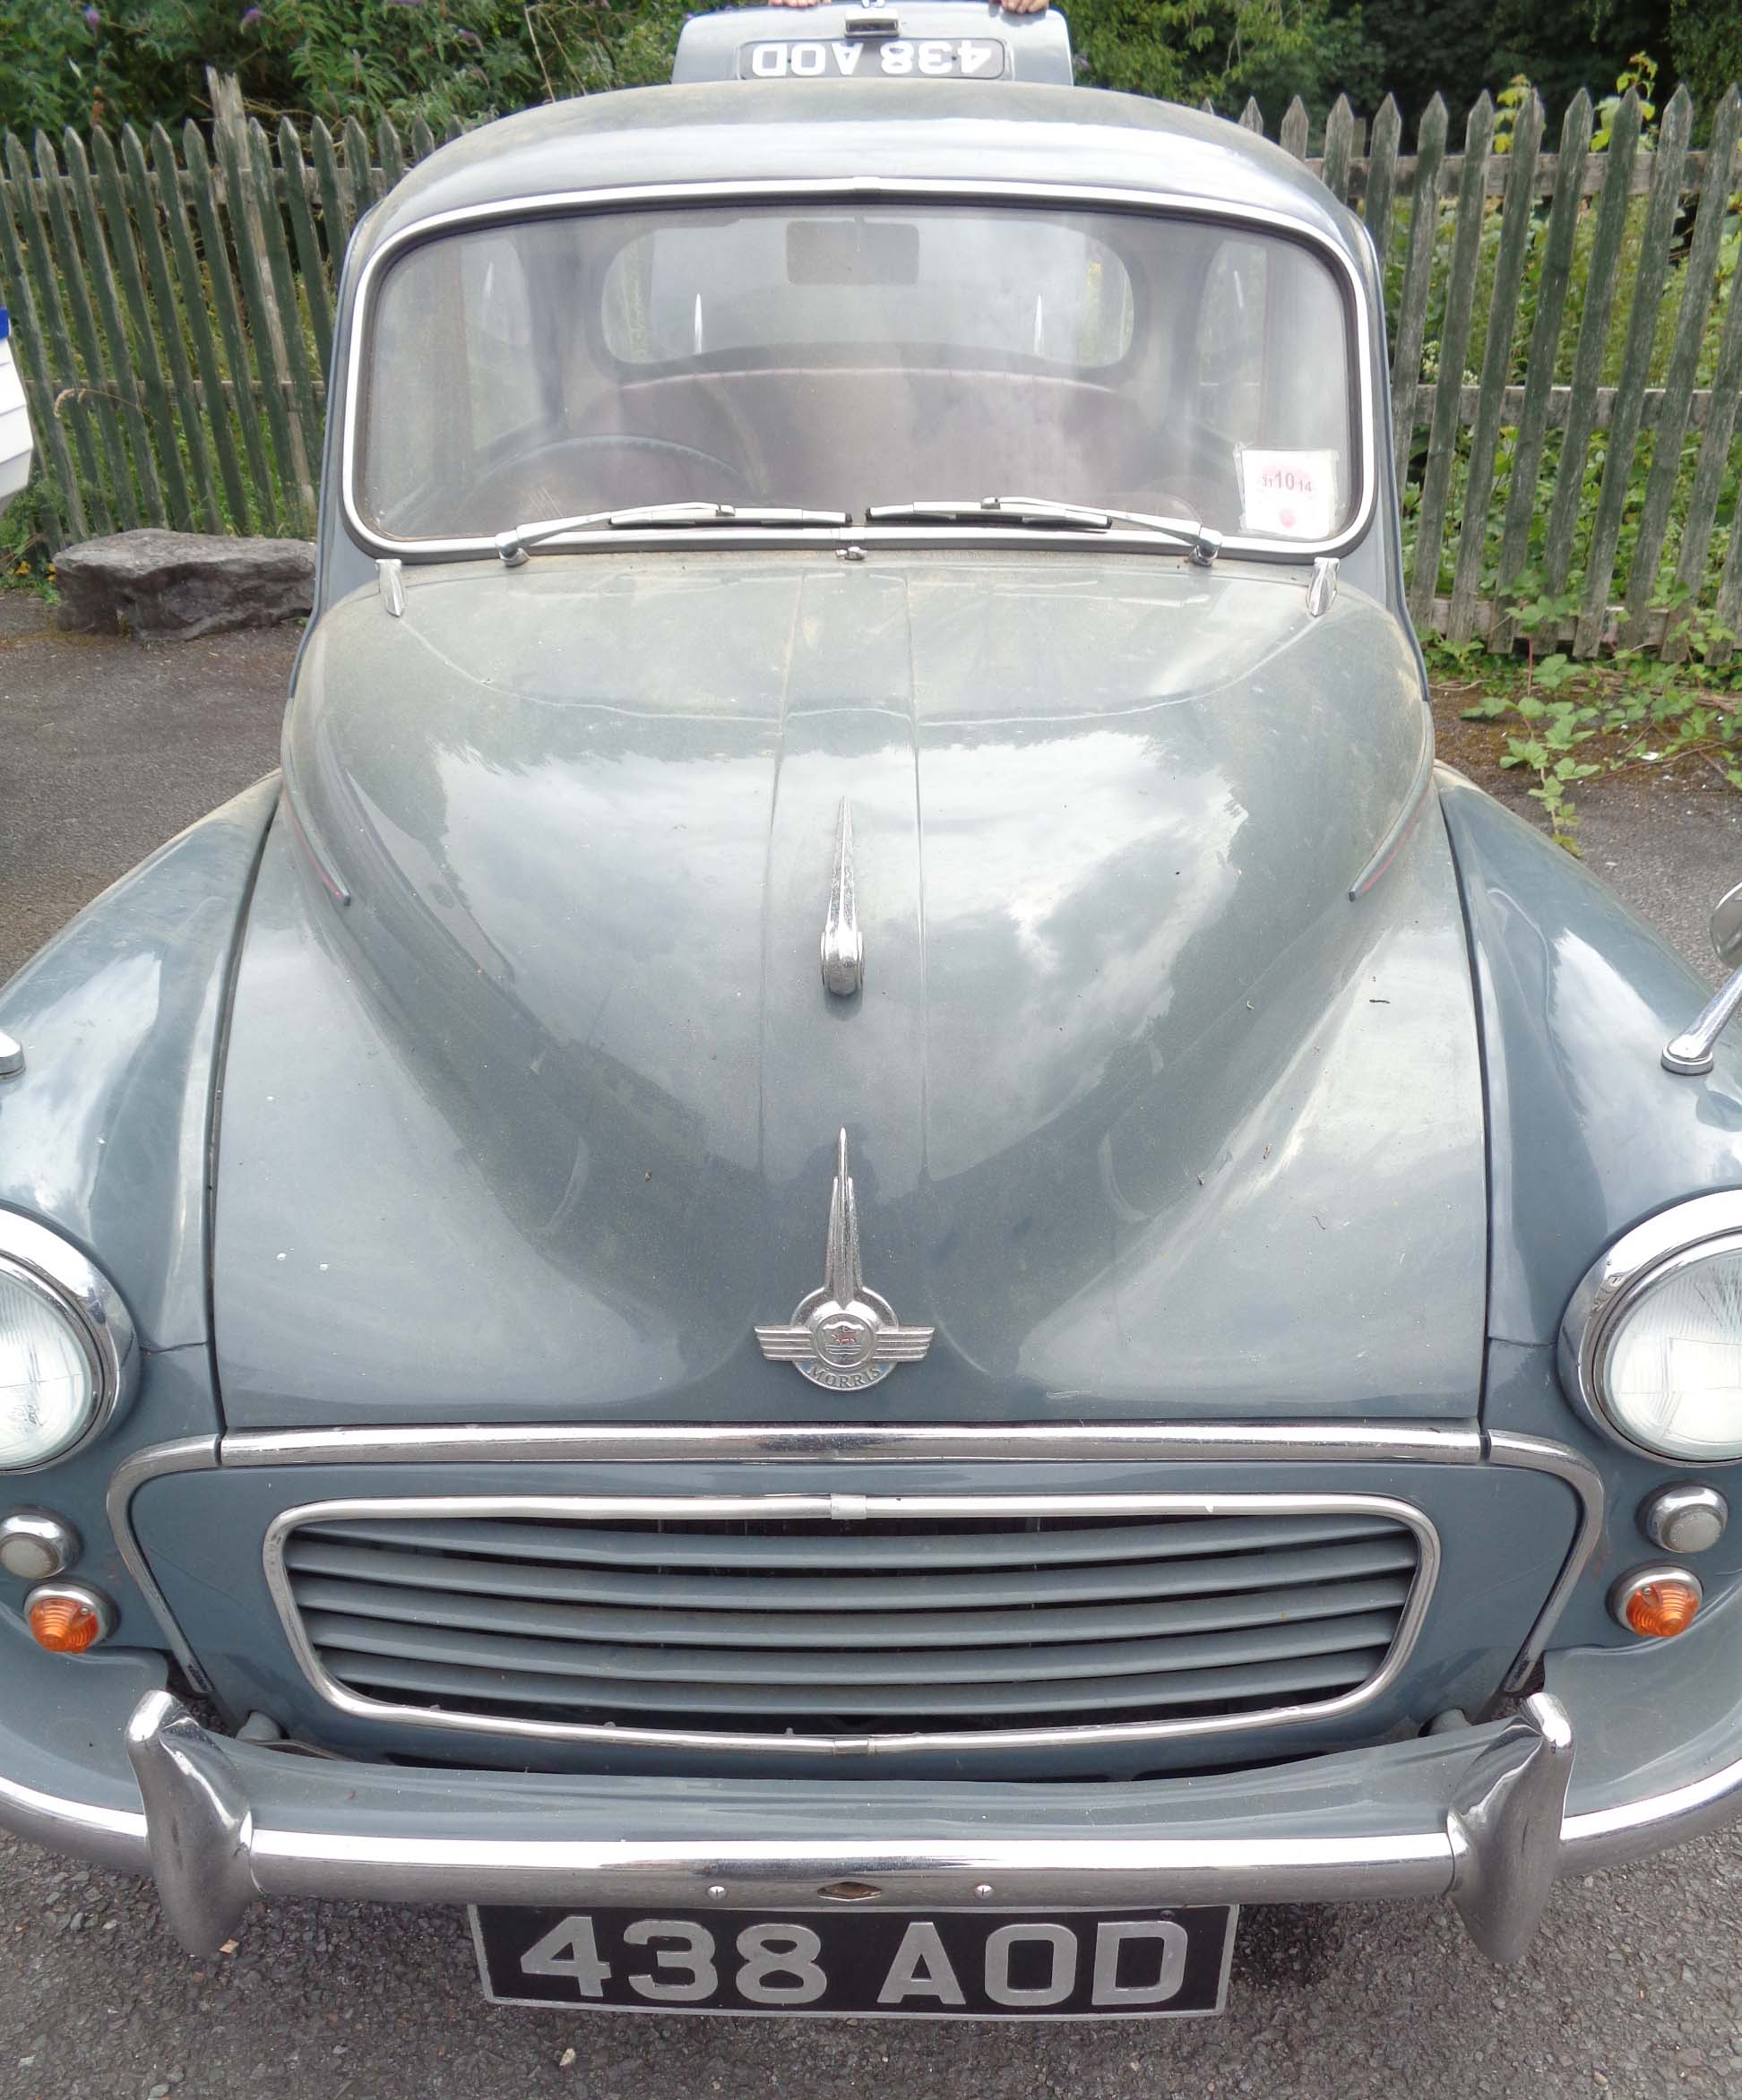 A 1959 Morris Minor 1000 saloon car in restored condition and grey livery with burgundy red - Image 2 of 17